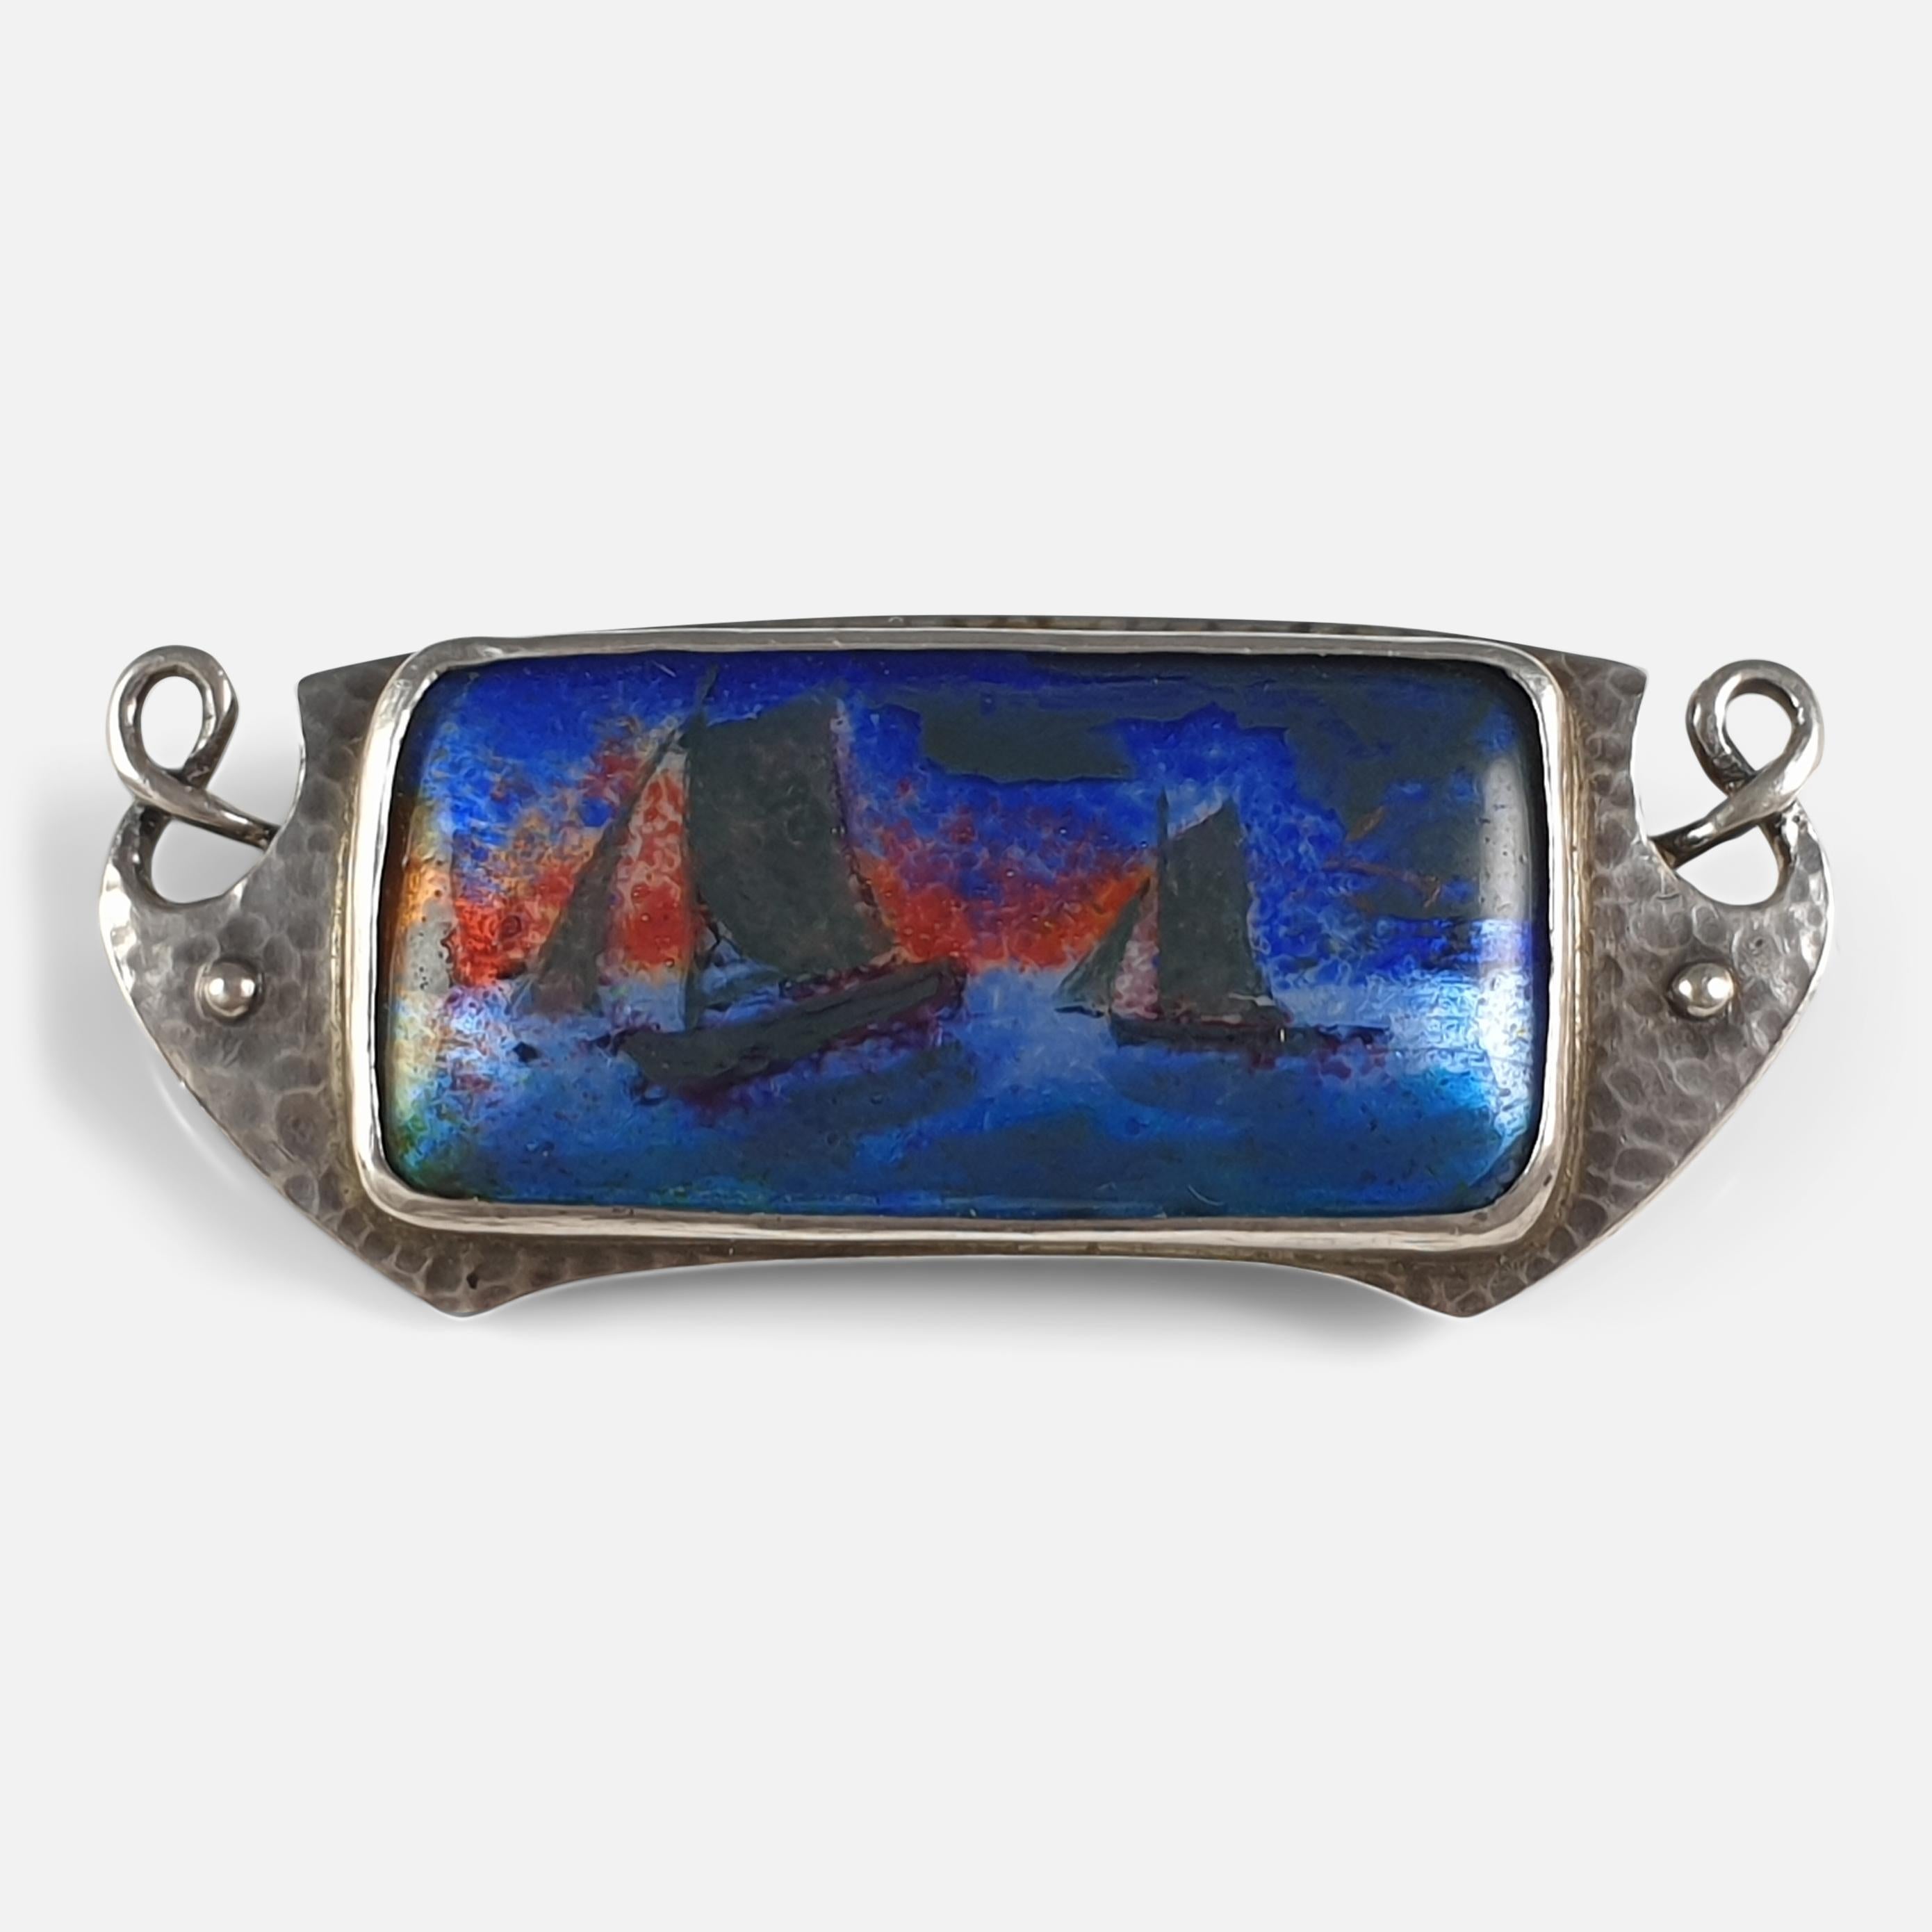 An Arts & Crafts spot-beaten silver and enamel plaque brooch by Murrle Bennett & Co, circa 1910. The brooch is set with an enamel plaque depicting sailing boats (possibly by Charles Fleetwood Varley), within a hammered silver surround. 

Stamped